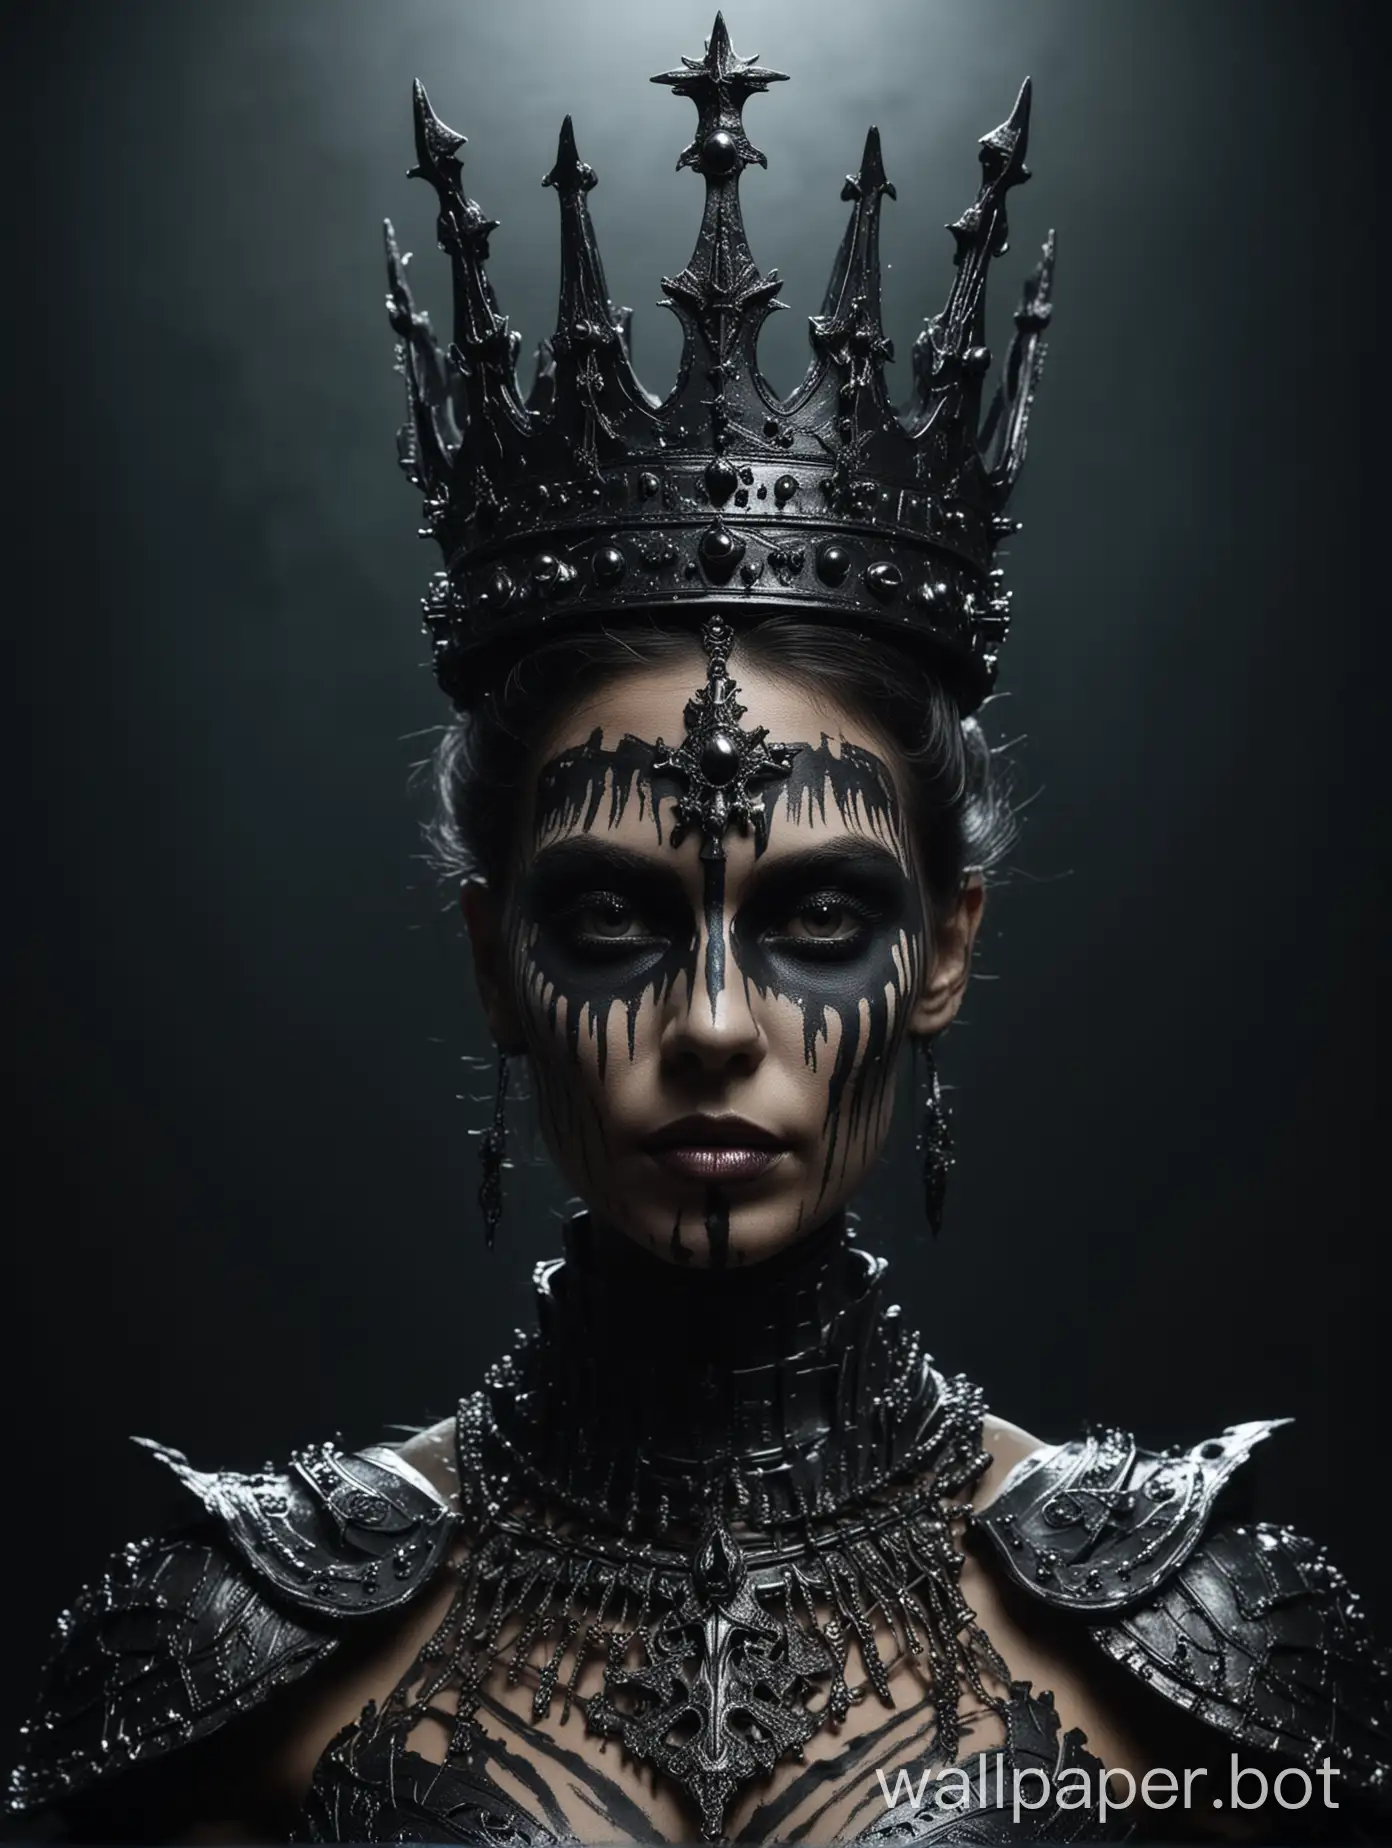 arafed woman with a crown and a face painted with black paint, portrait of a dark goddess, scary queen of death, portrait of a cyborg queen, with an armor and a crown, cinematic goddess shot, with a crown, beautiful elegant demon queen, wearing crown, with a spine crown, queen of the underworld, queen of darkness, queen of death